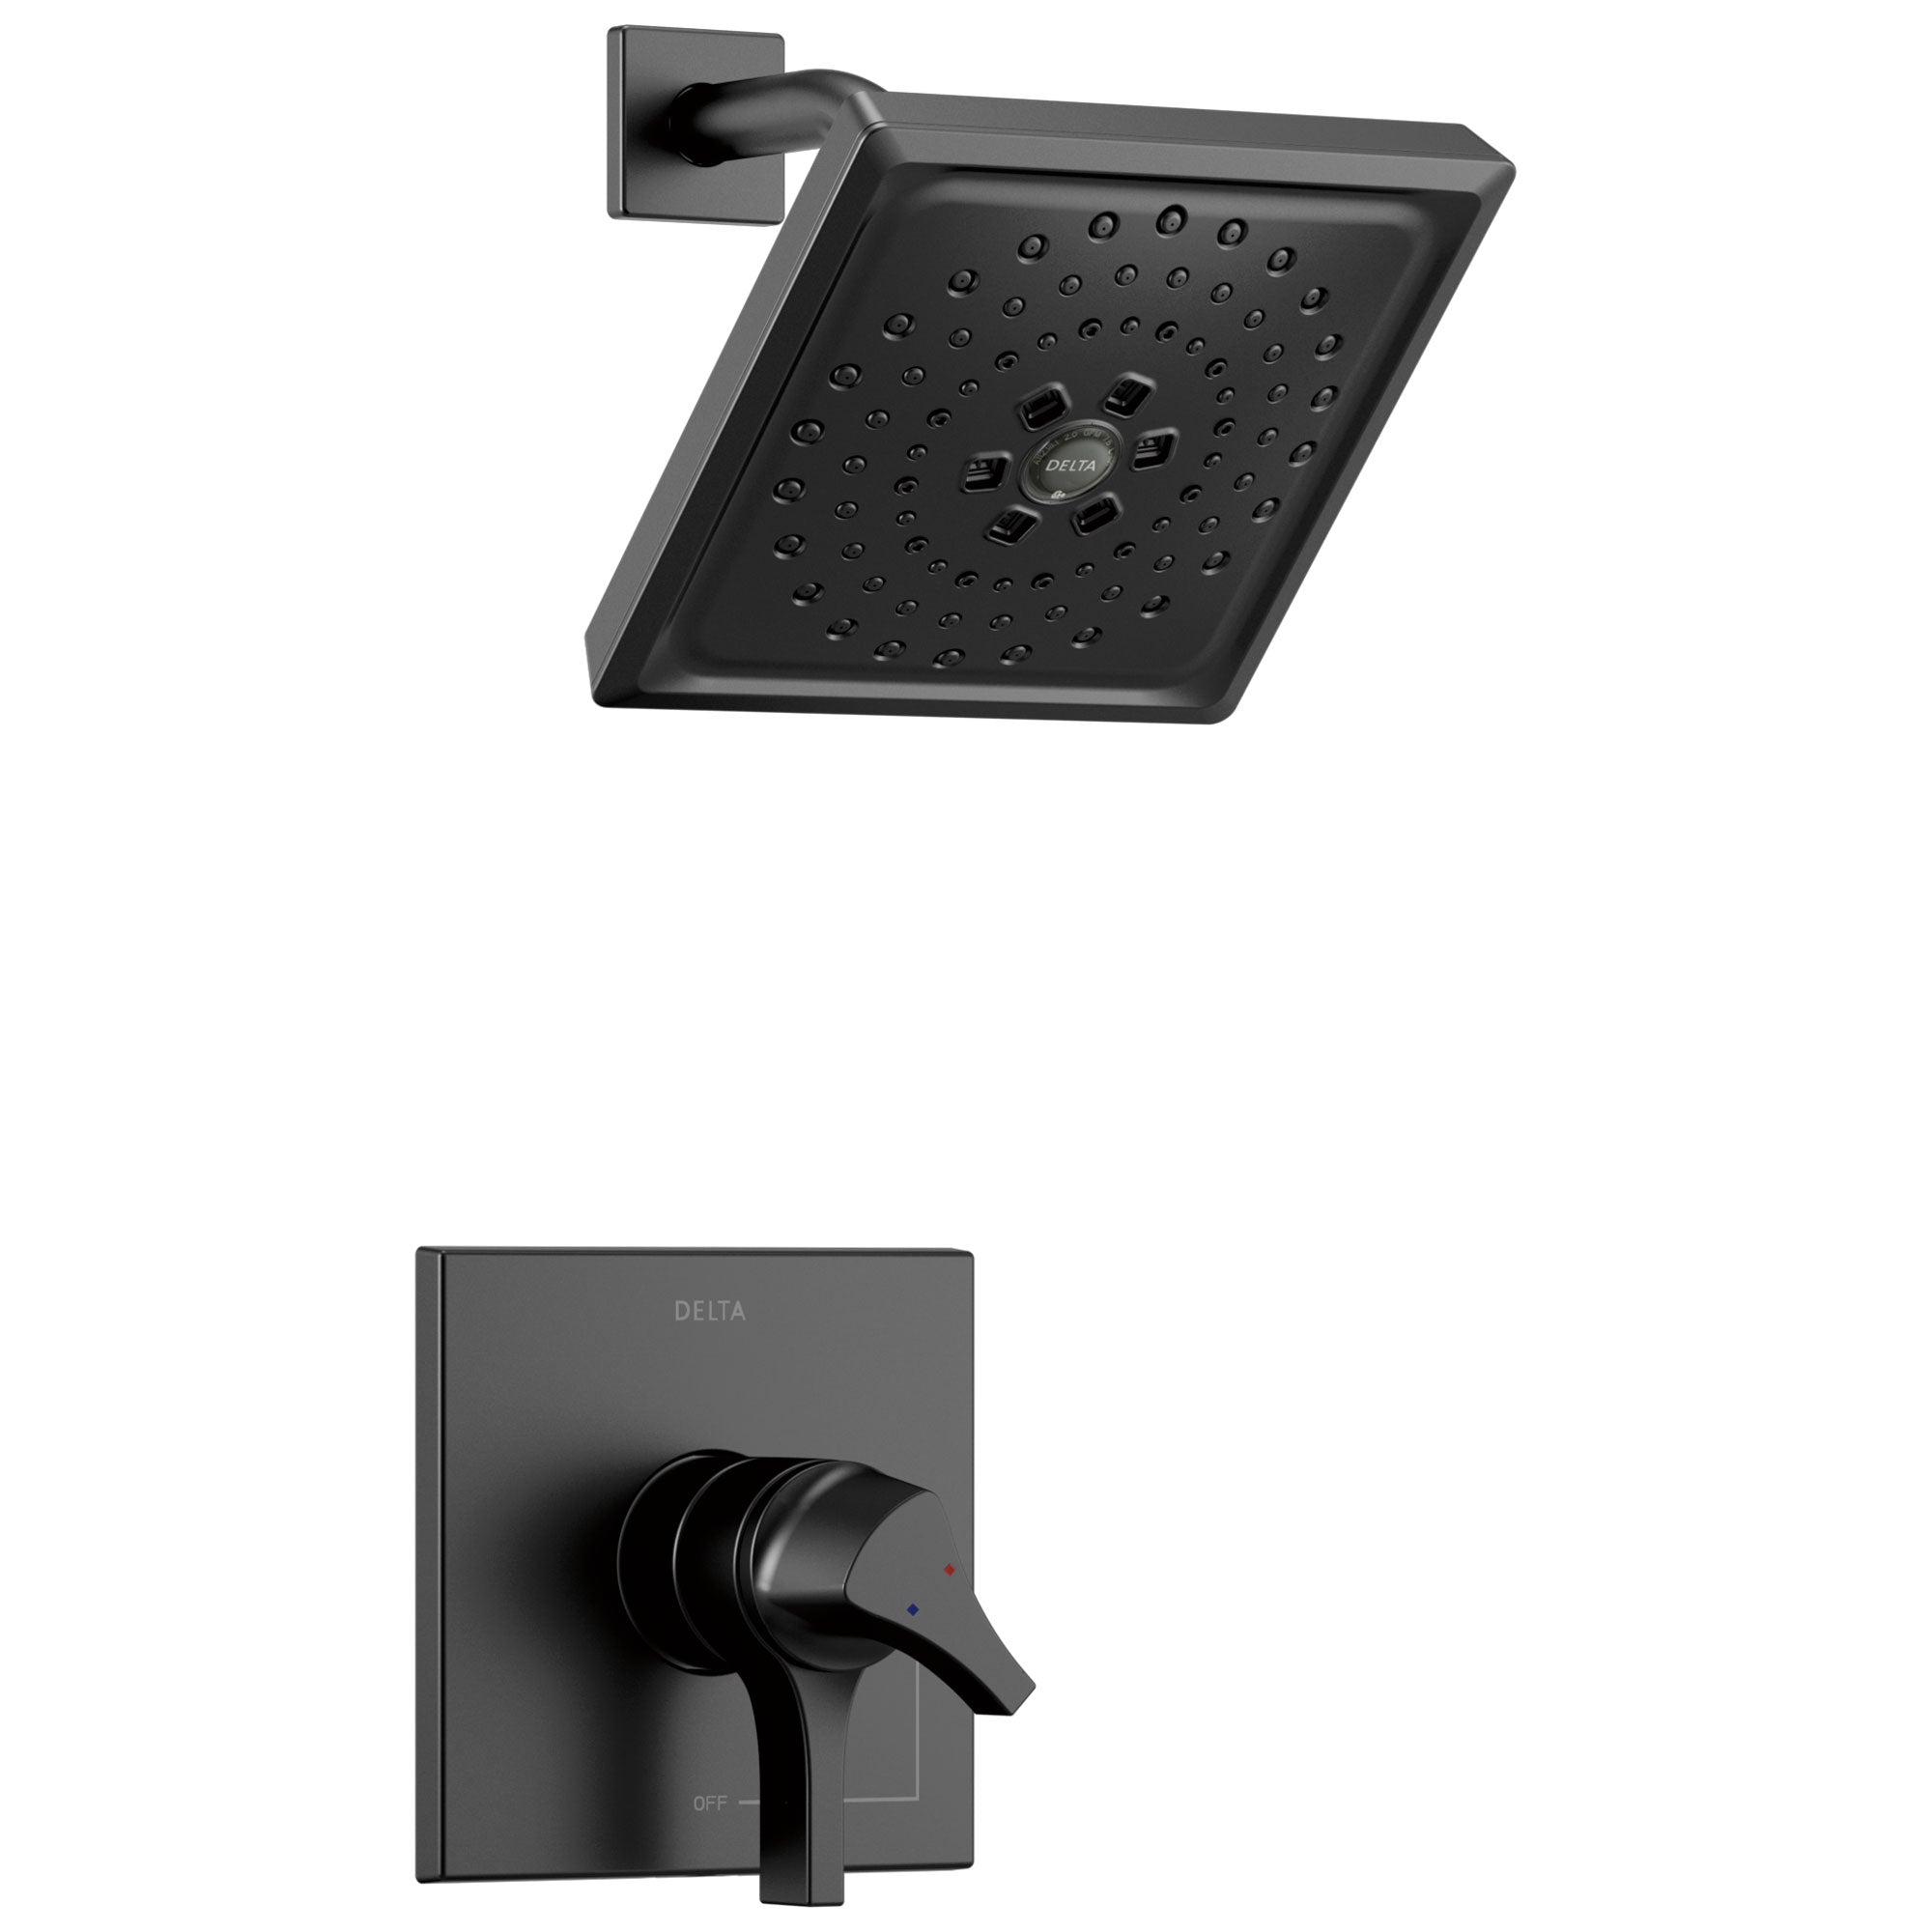 Delta Zura Matte Black Finish Monitor 17 Series H2Okinetic Shower Only Faucet with Handles, Cartridge, and Valve without Stops D3373V